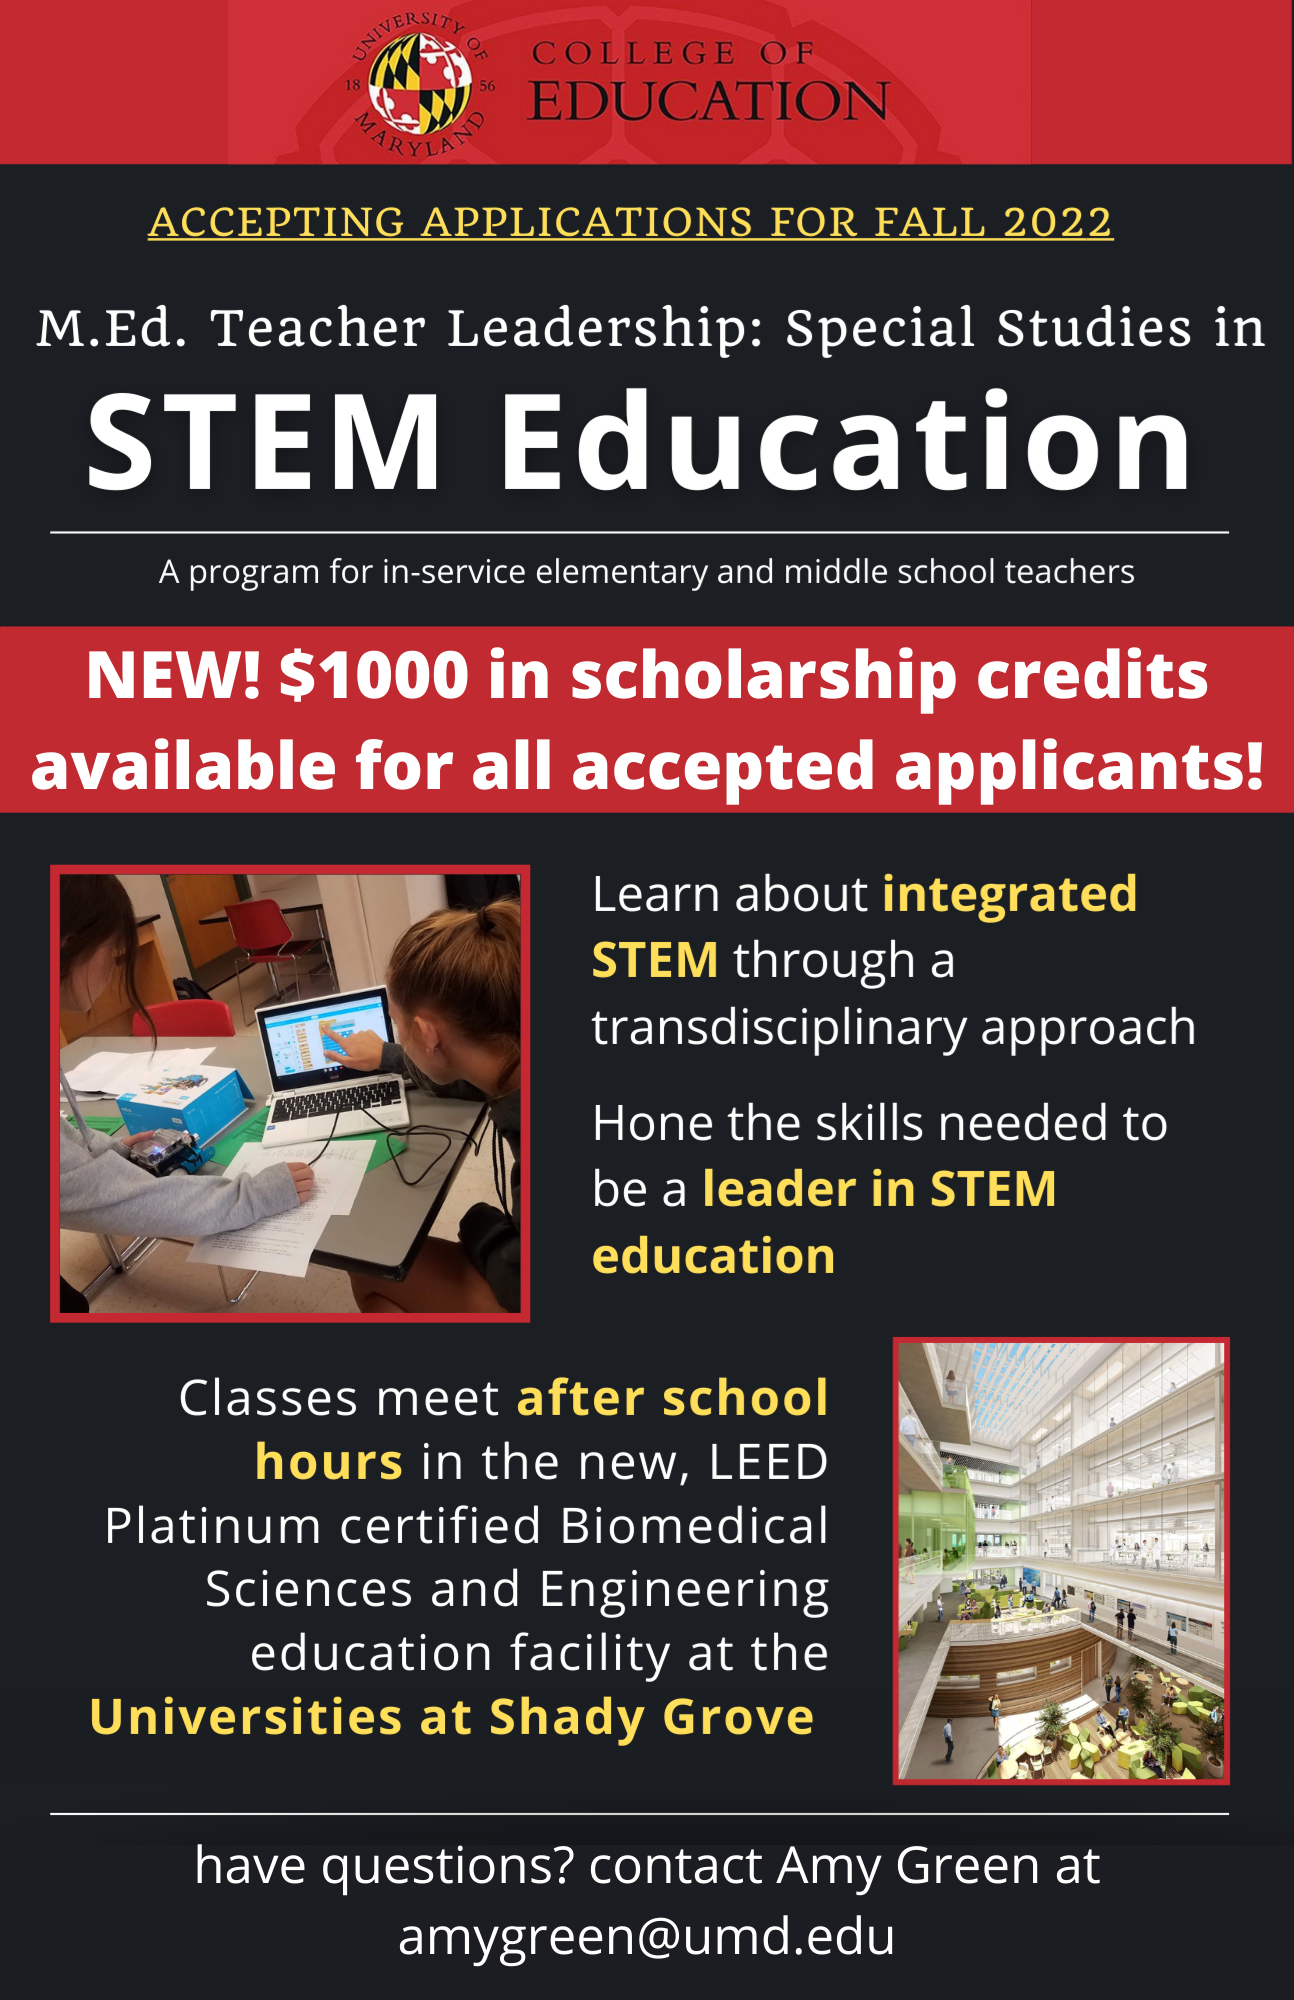 Now accepting applications for Fall 2022 for the M.Ed. STEM program!